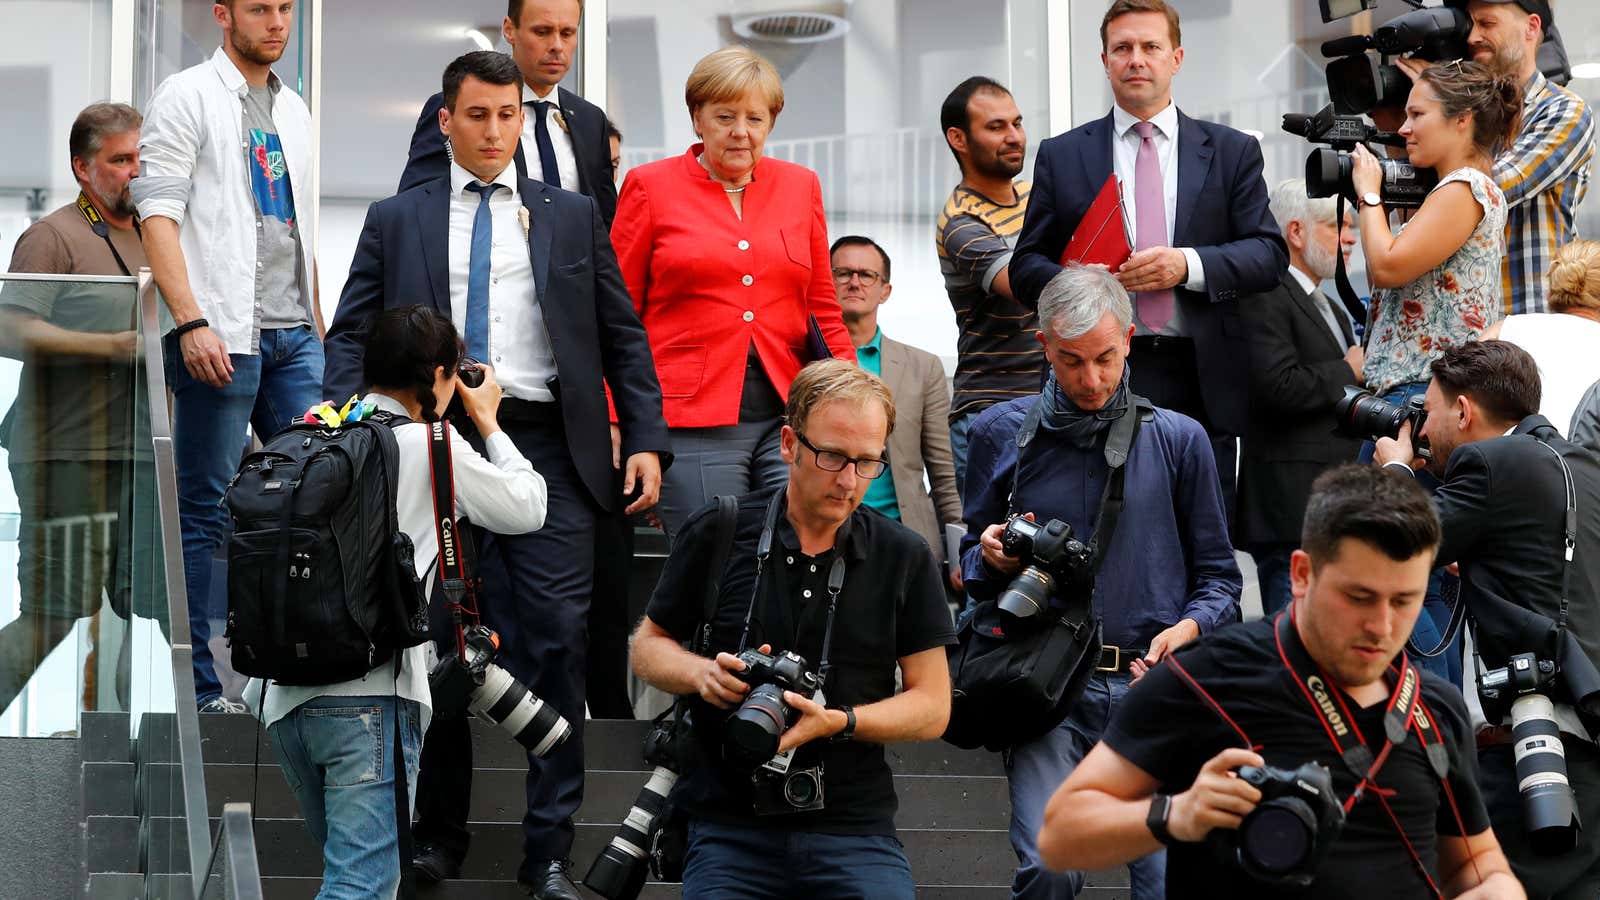 Merkel’s summer holiday begins now—but she refused to disclose where she’s going.